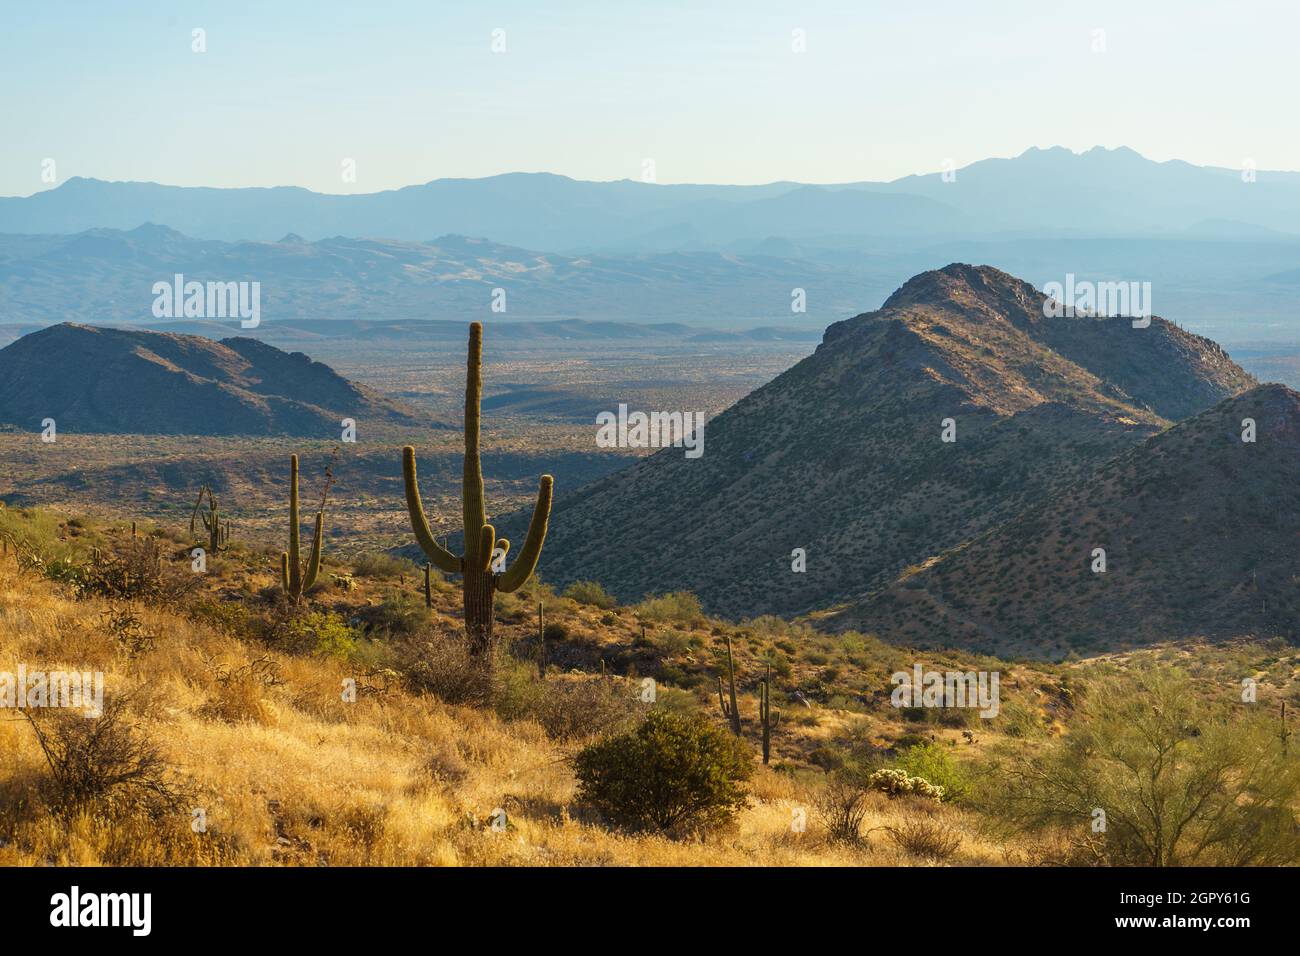 Scenic View Of Landscape And Mountains Against Sky With Lone Saguaro Cactus Stock Photo